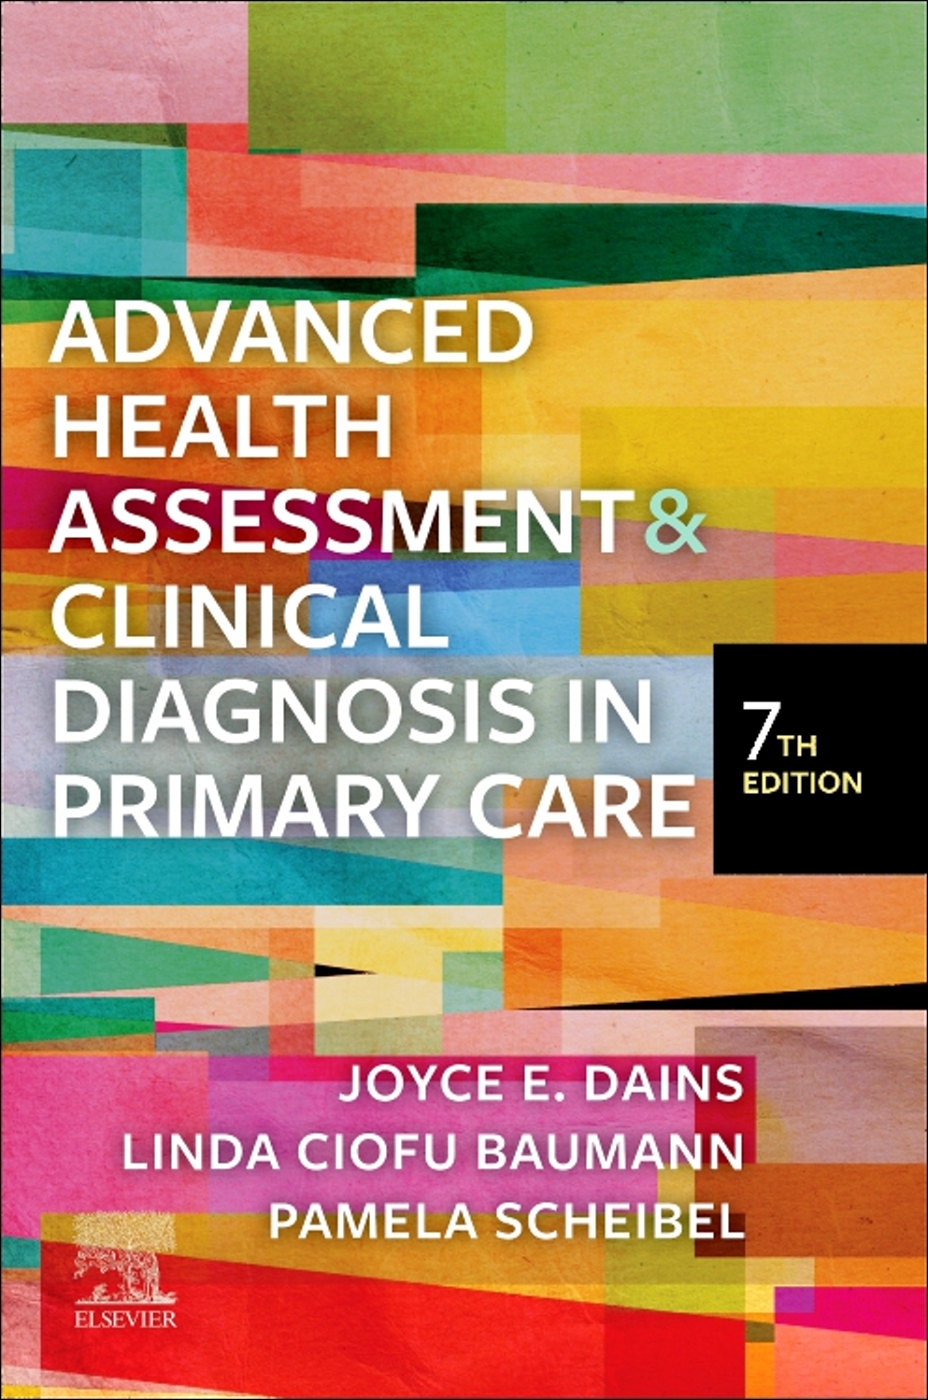 Advanced Health Assessment & Clinical Diagnosis in Primary Care, 7E